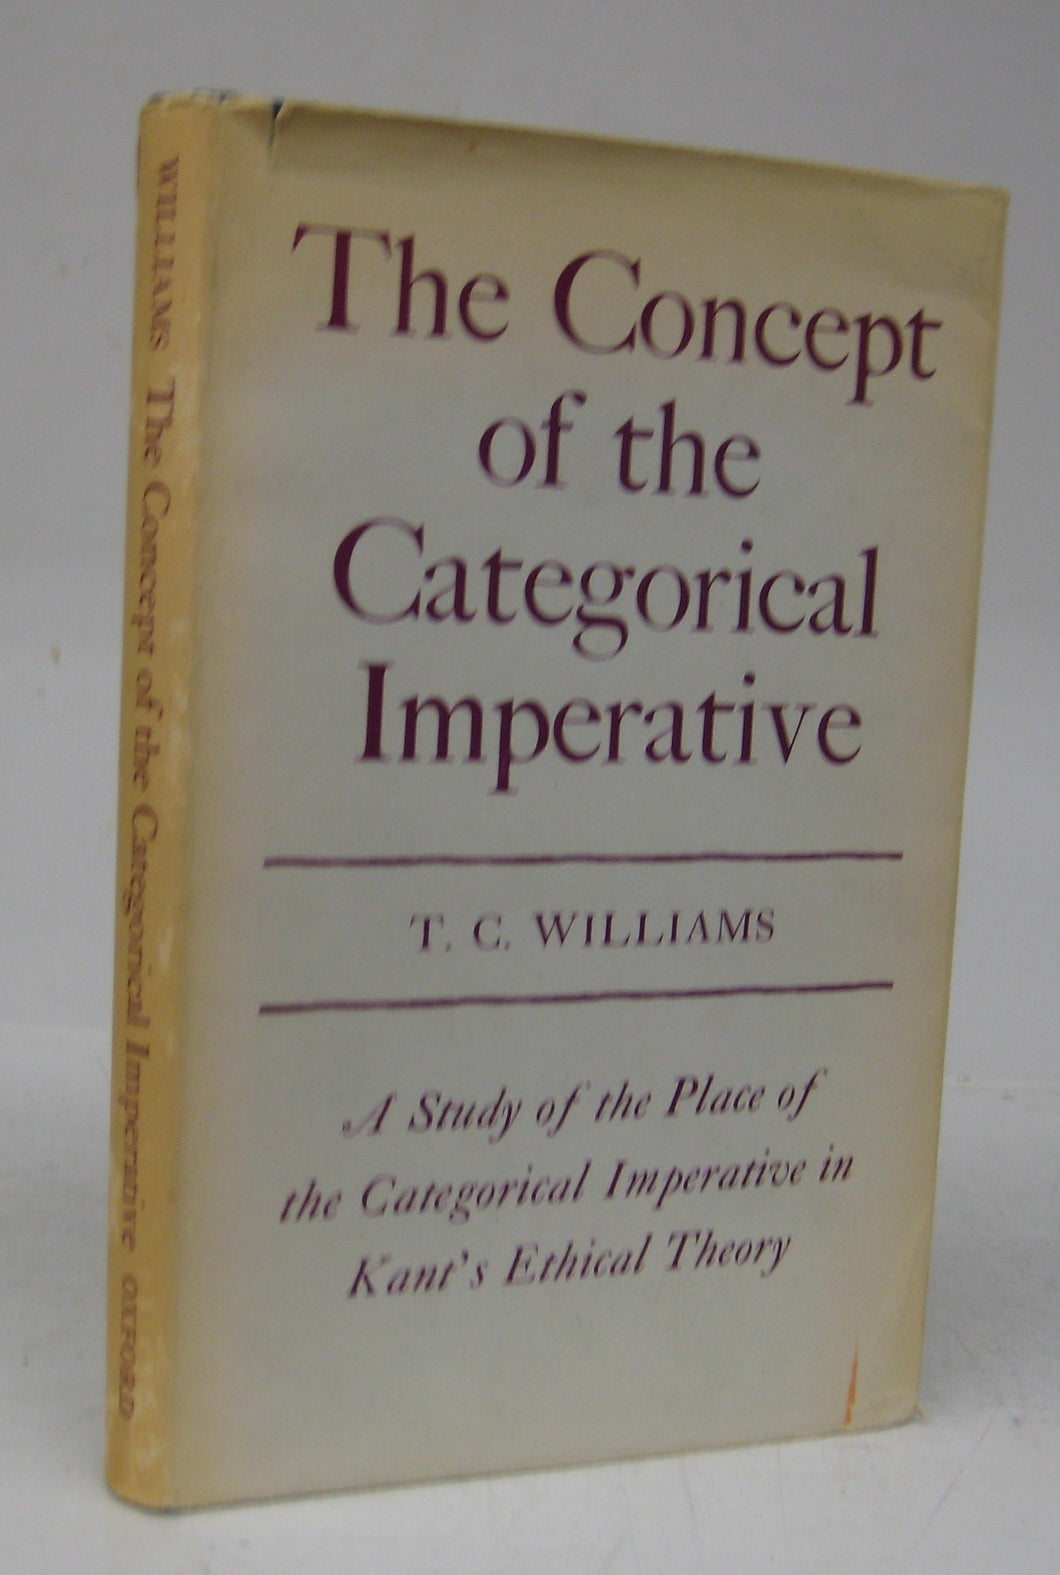 The Concept of the Categorical Imperative: A Study of the Place of the Categorical Imperative in Kant's Ethical Theory